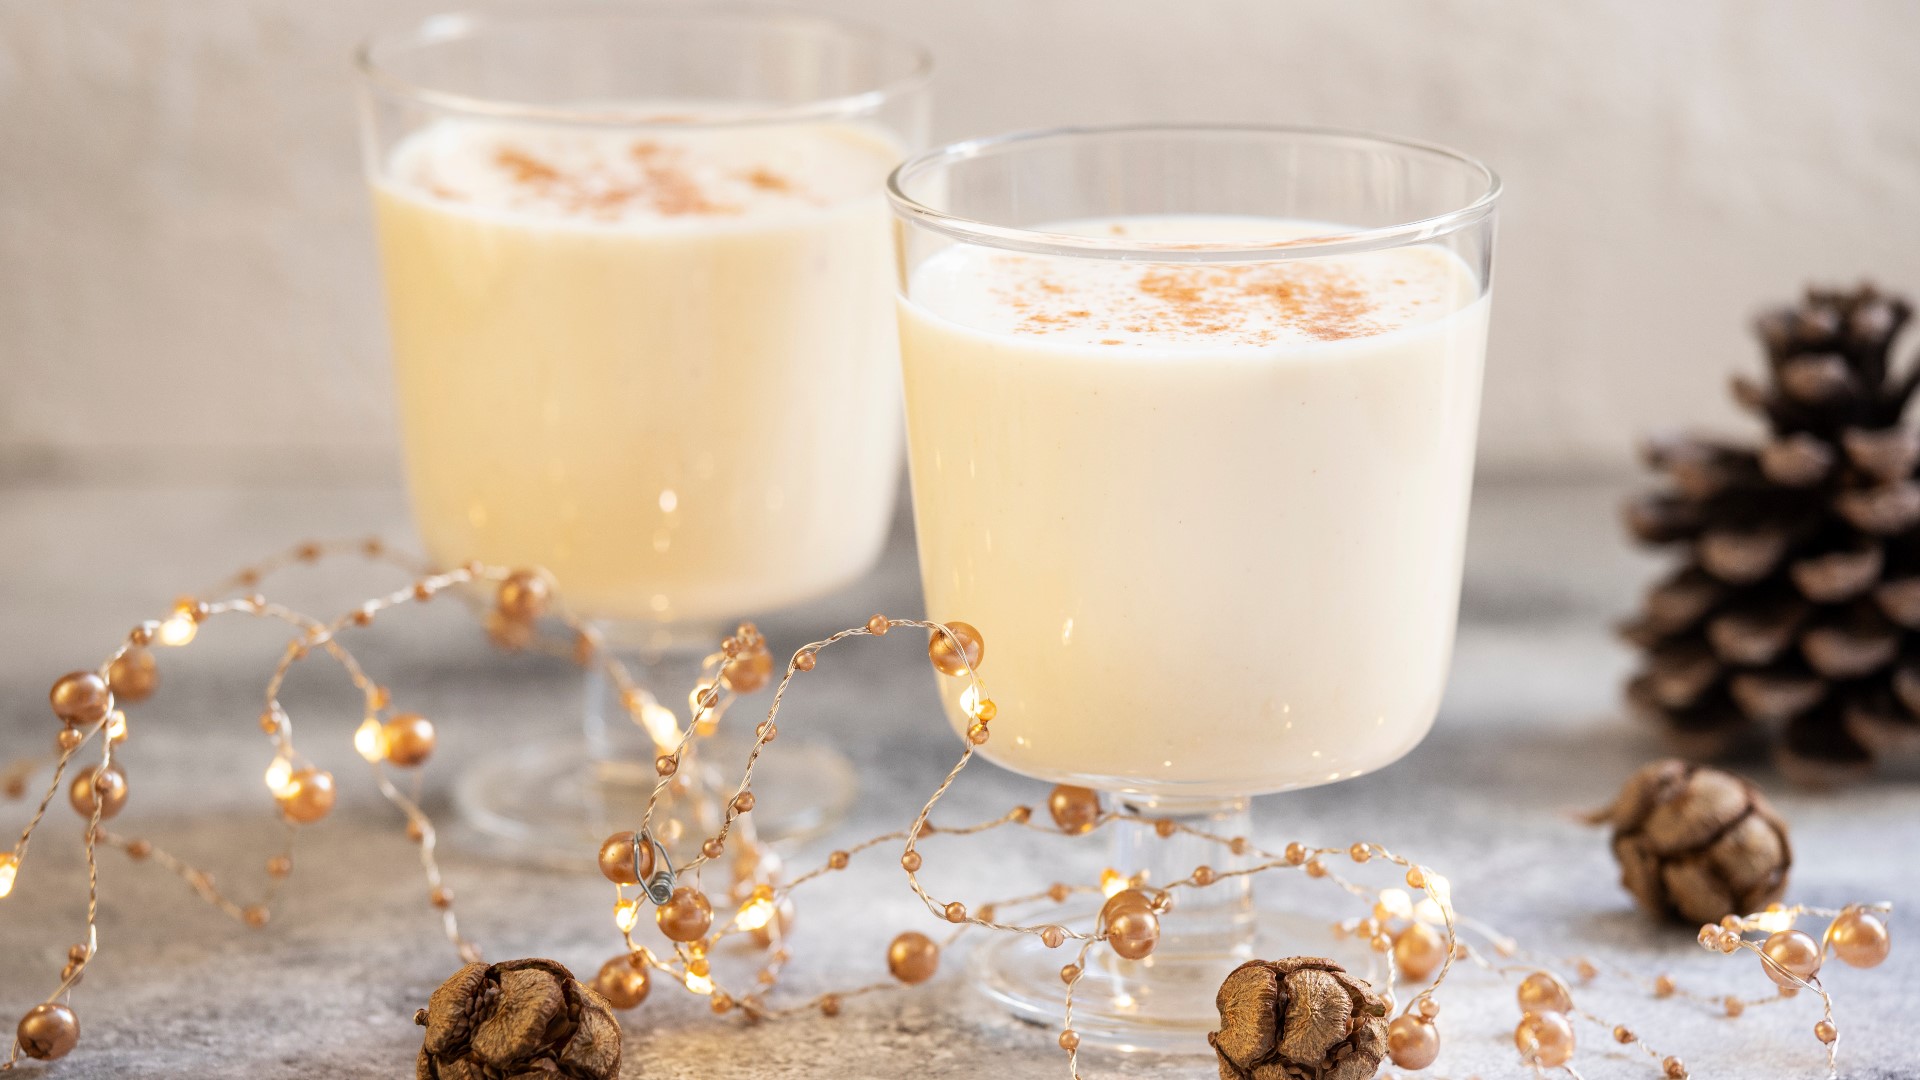 Eggnog may be one of the most controversial treats during the holidays and believe it or not this unique beverage has had some famous fans.